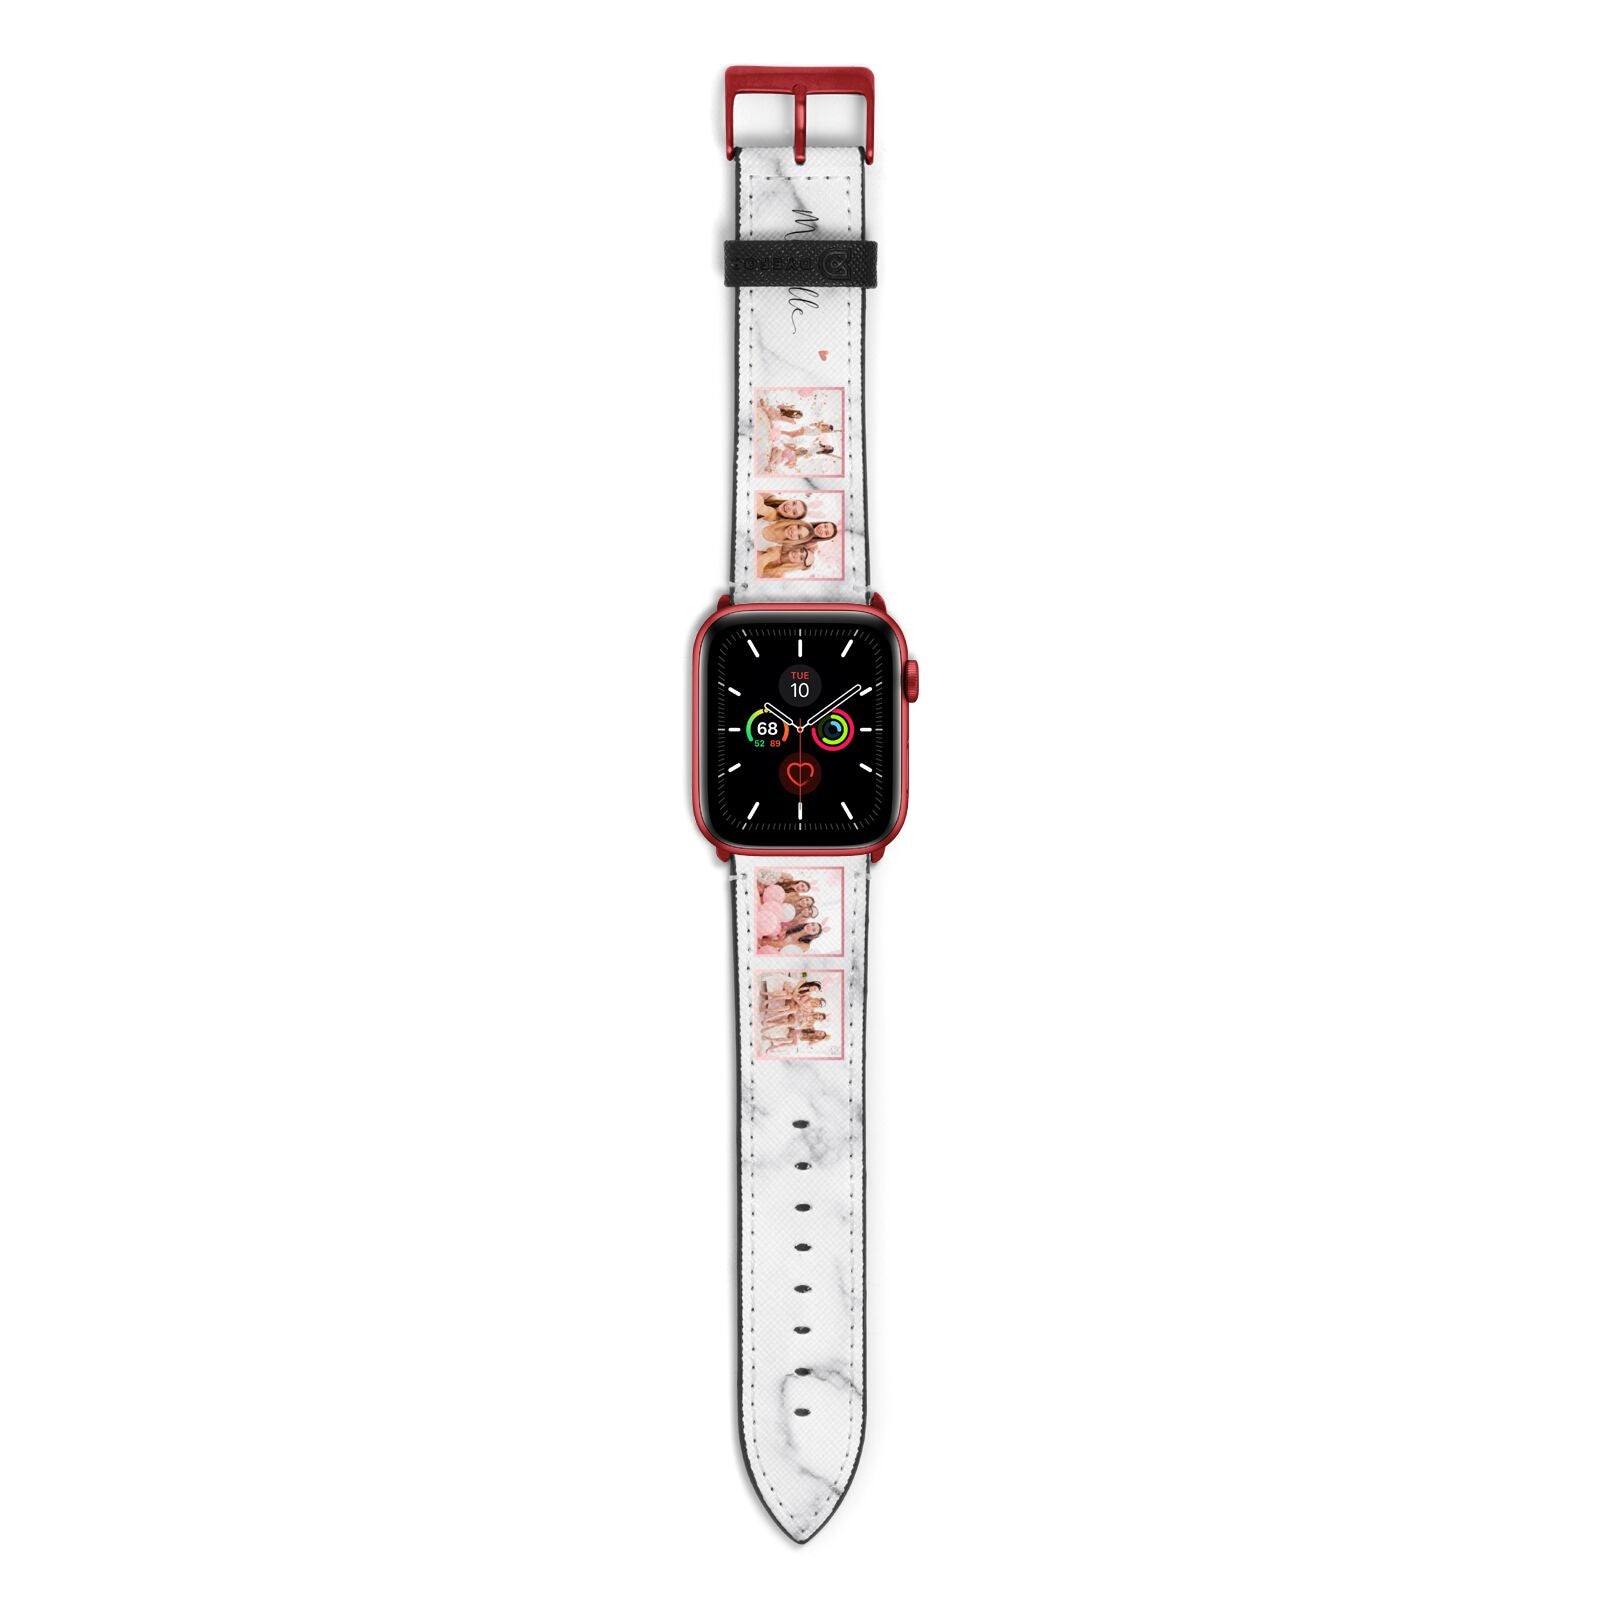 Marble Photo Strip Personalised Apple Watch Strap with Red Hardware